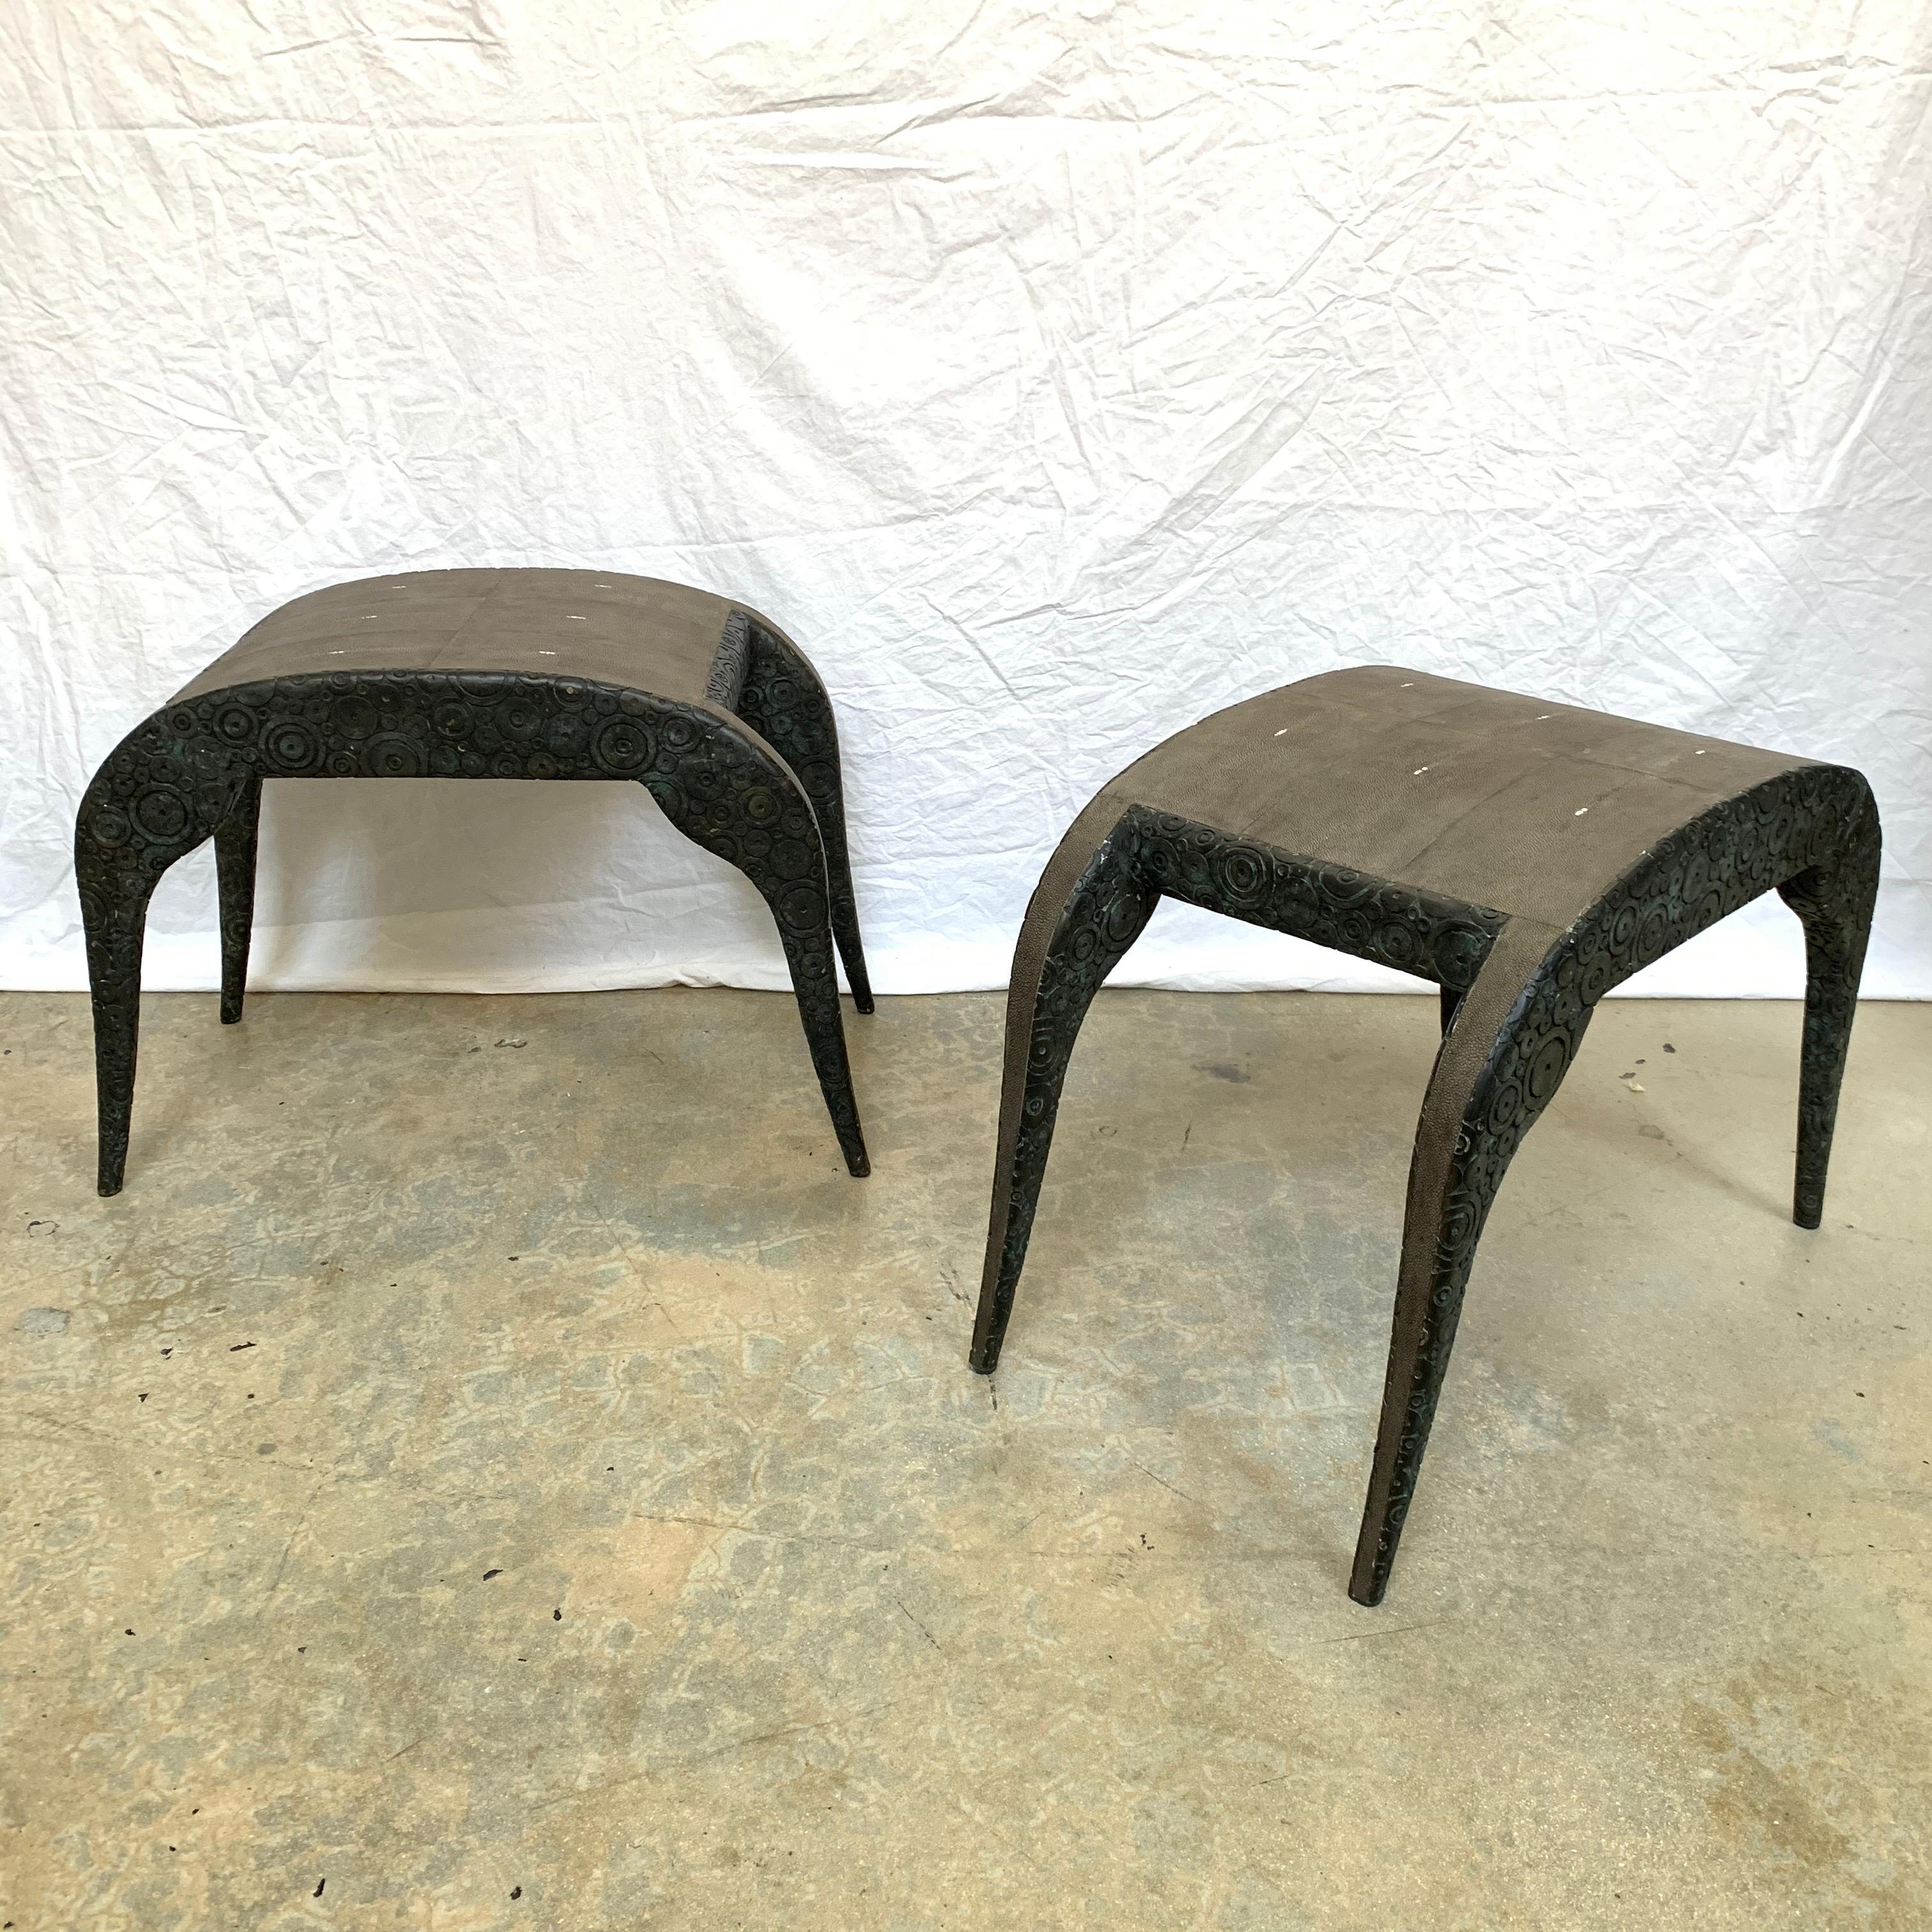 Stunning pair of heavy sculptural stools rendered in a frame of bronze-patina brass with sculpted circles/rings topped with antique black shagreen seat and leg spine, designed by Ria & Yiouri Augousti, Paris, France, 1990.